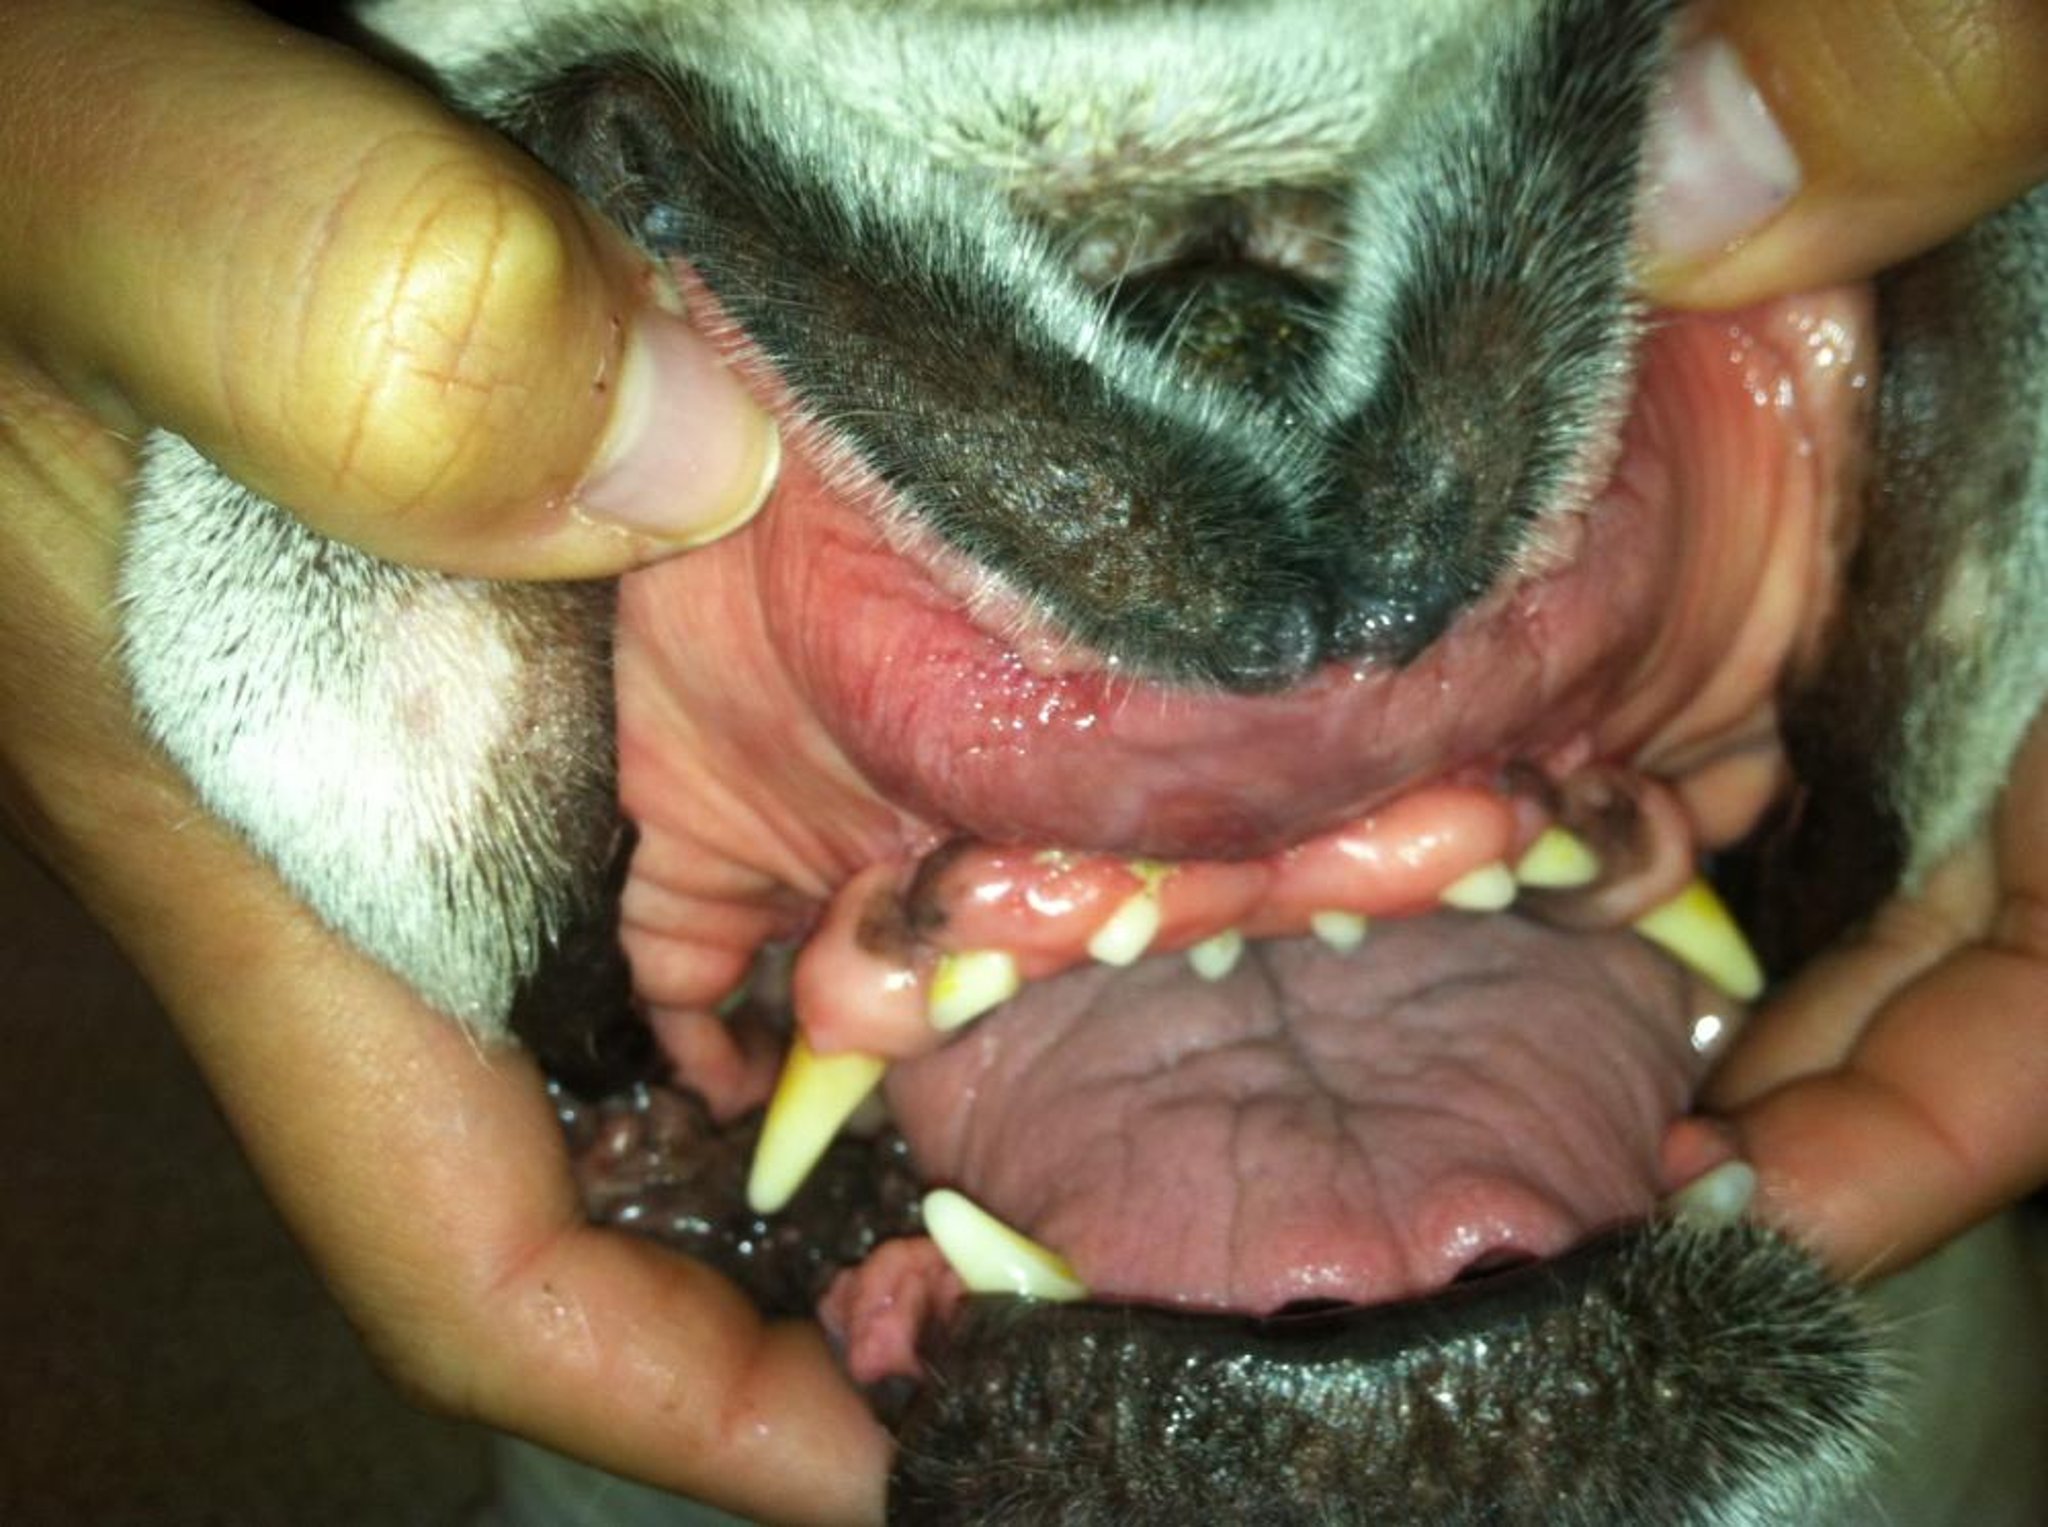 Mast cell tumor in the rostral upper lip, 10-year-old English Bulldog